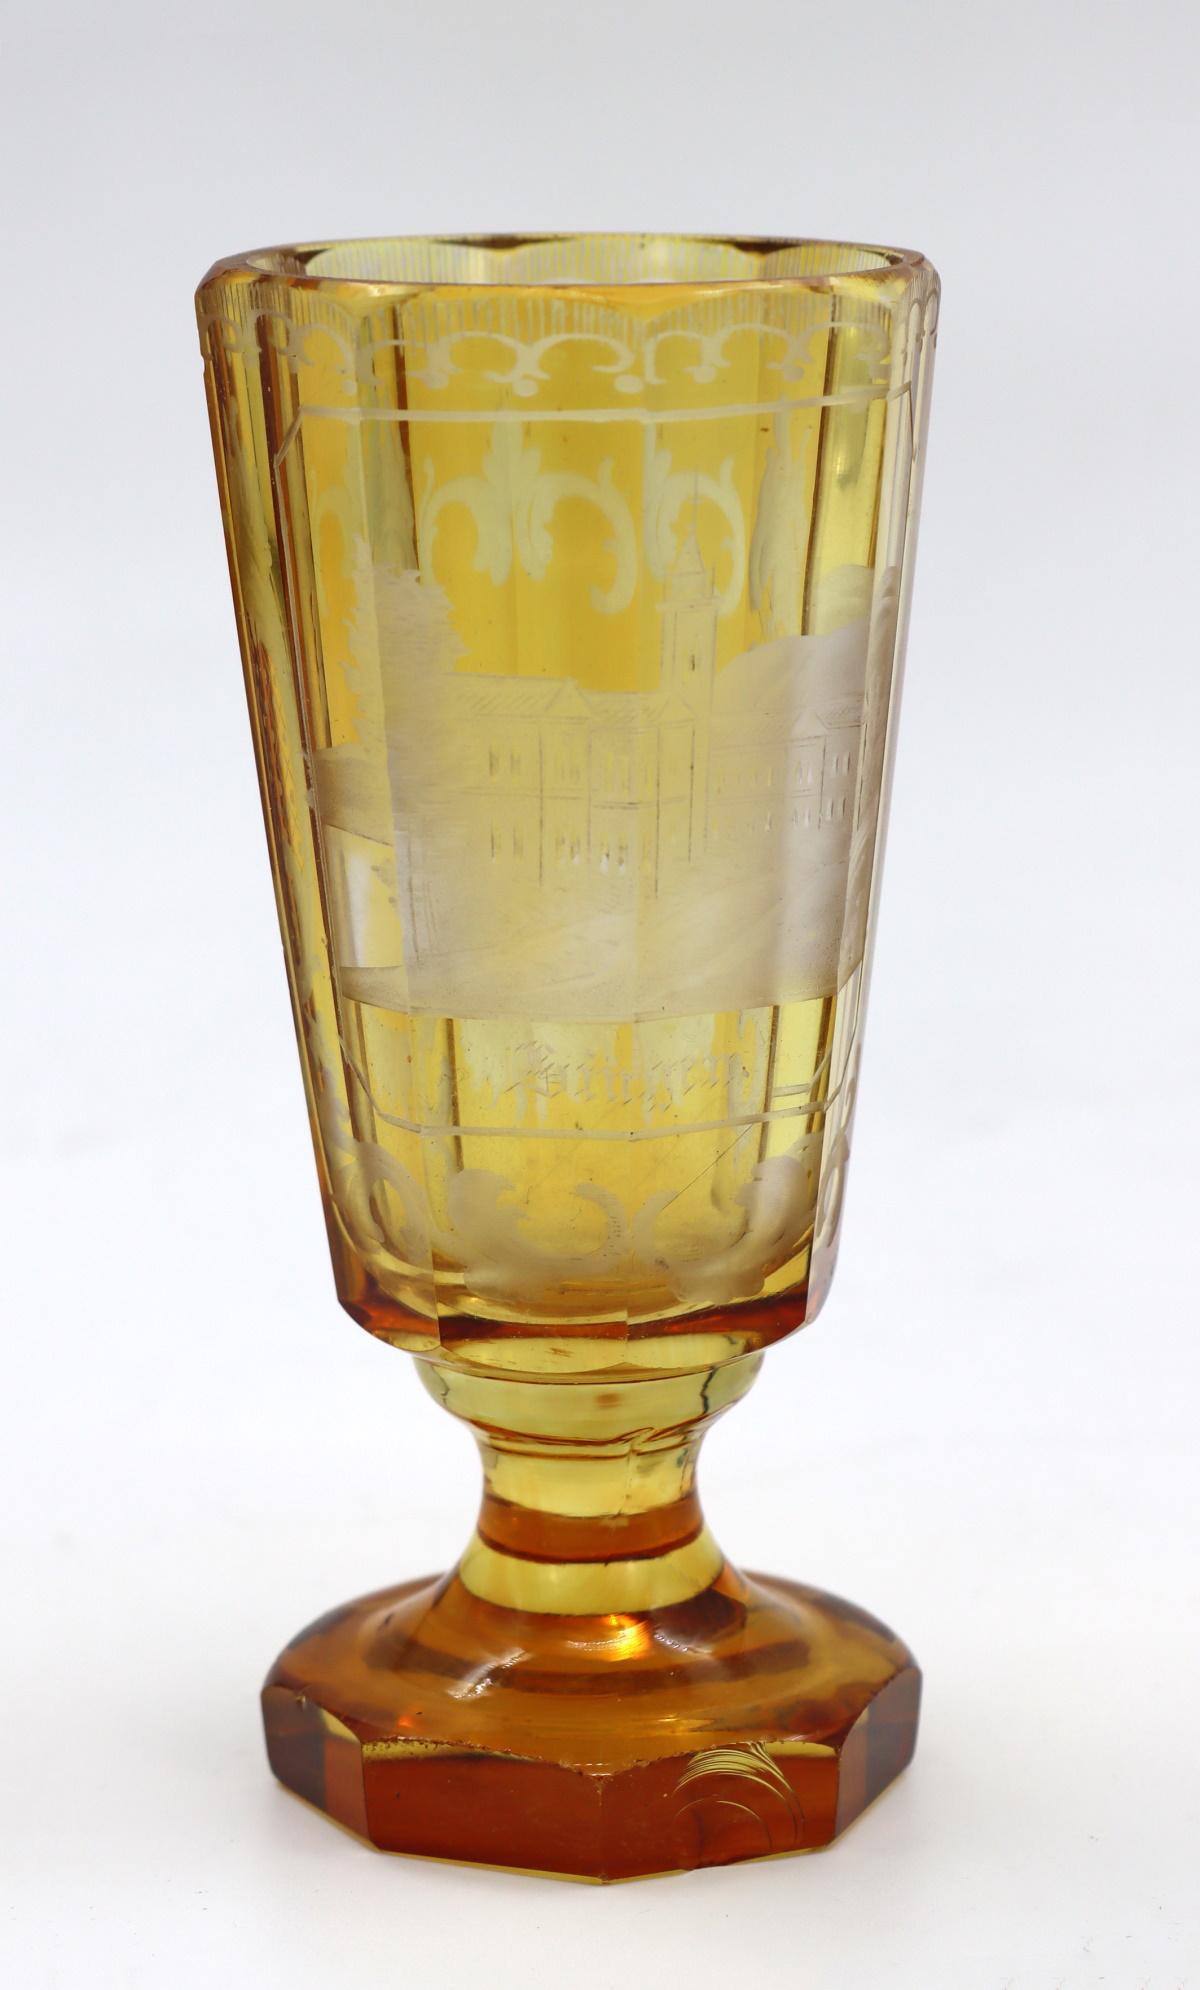 Two amber coloured Bohemian crystal glasses, 19th century, Napoleon III period.
Measures: H: 14 cm, D: 6 cm.